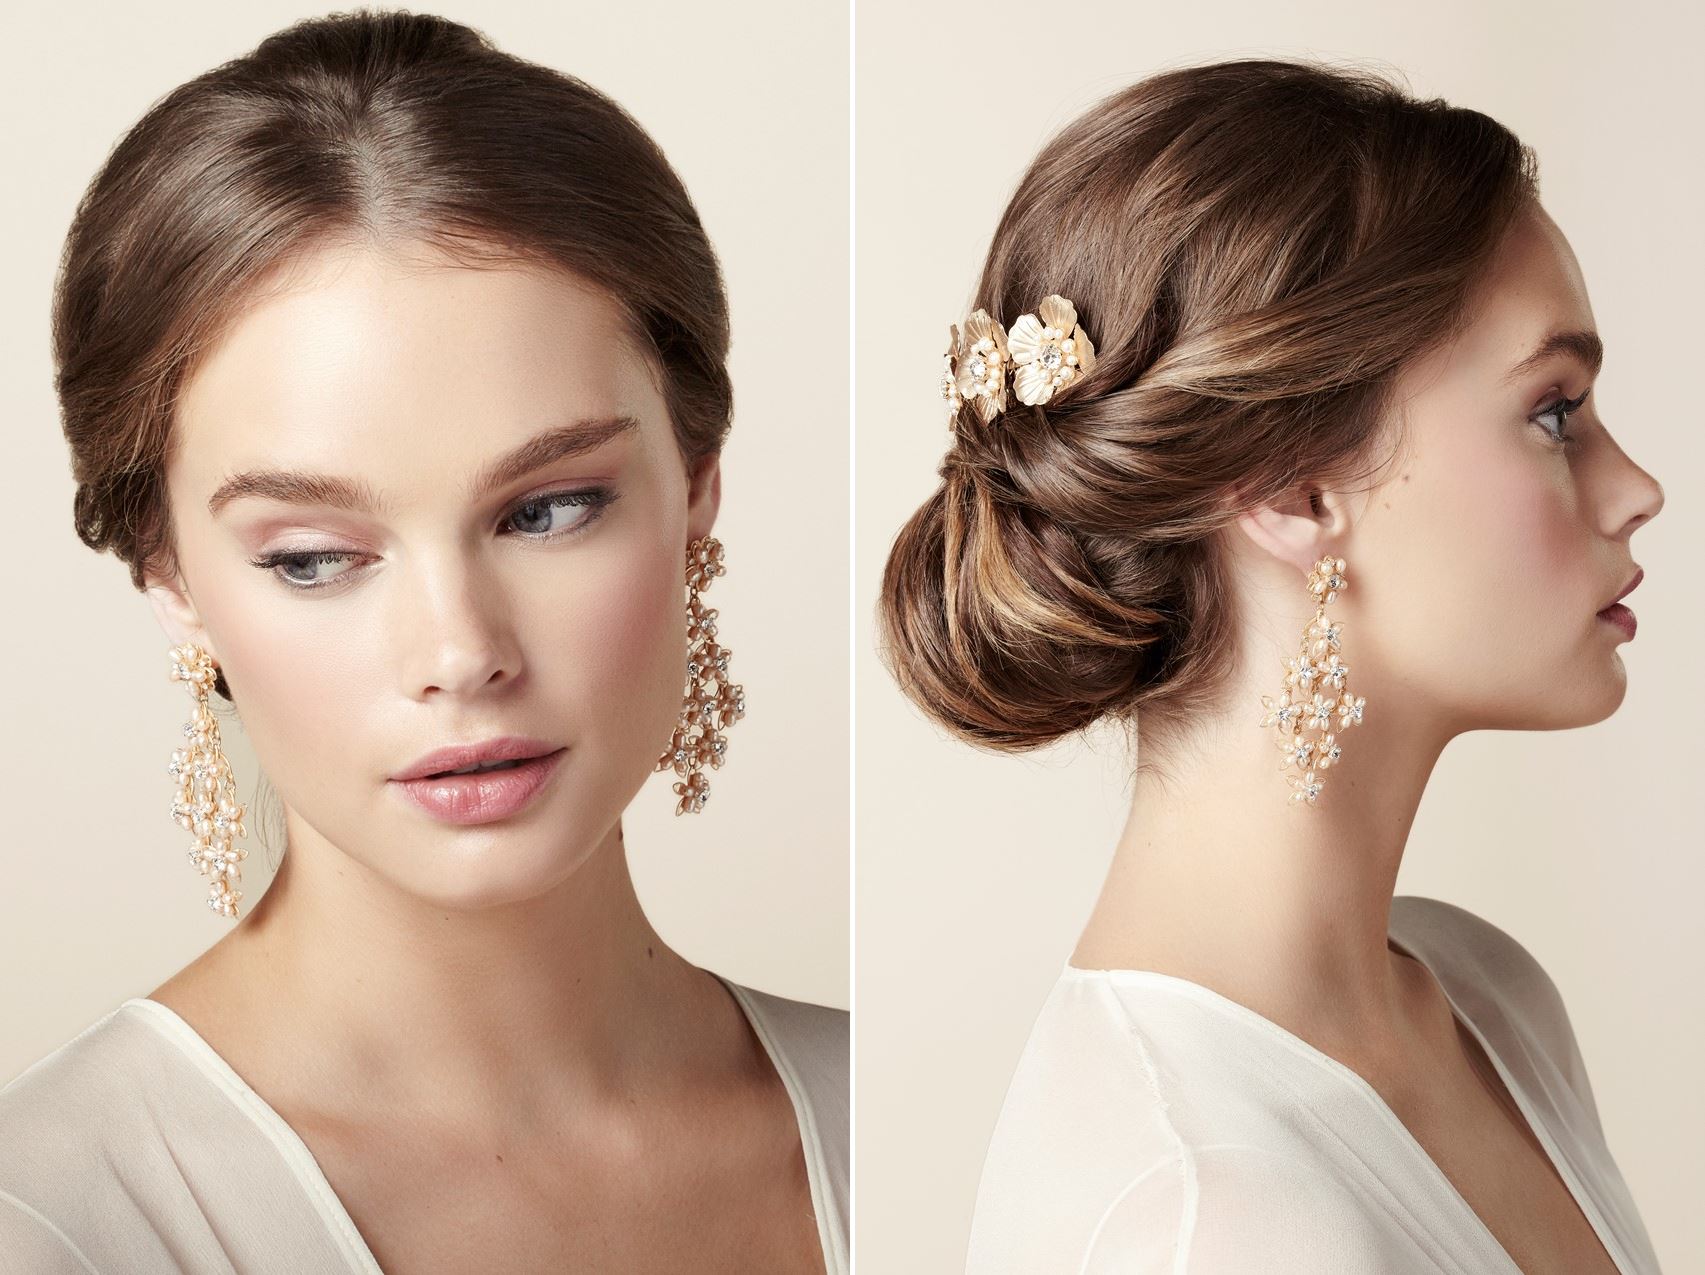 Blush Cascade Bridal Earrings - The Beautiful New Collection of Bridal Hair Accessories & Jewelry from Elizabeth Bower